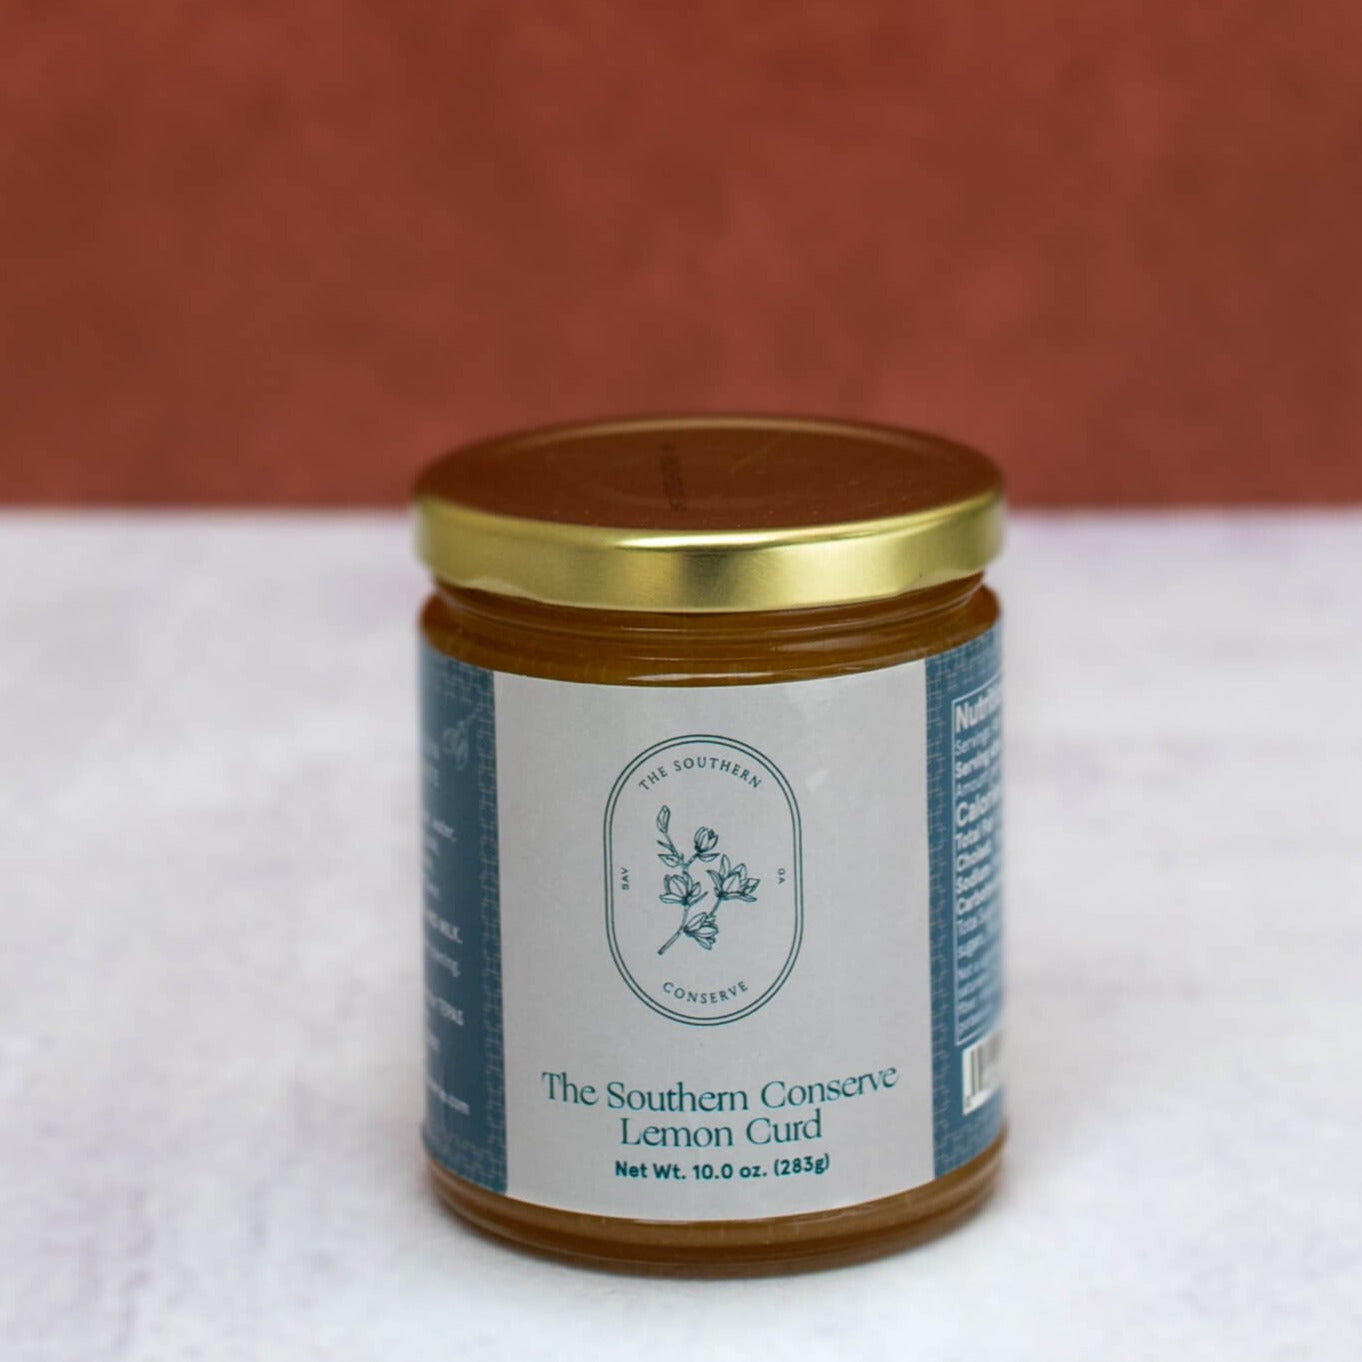 Lemon Curd- The Southern Conserve - Local Brand